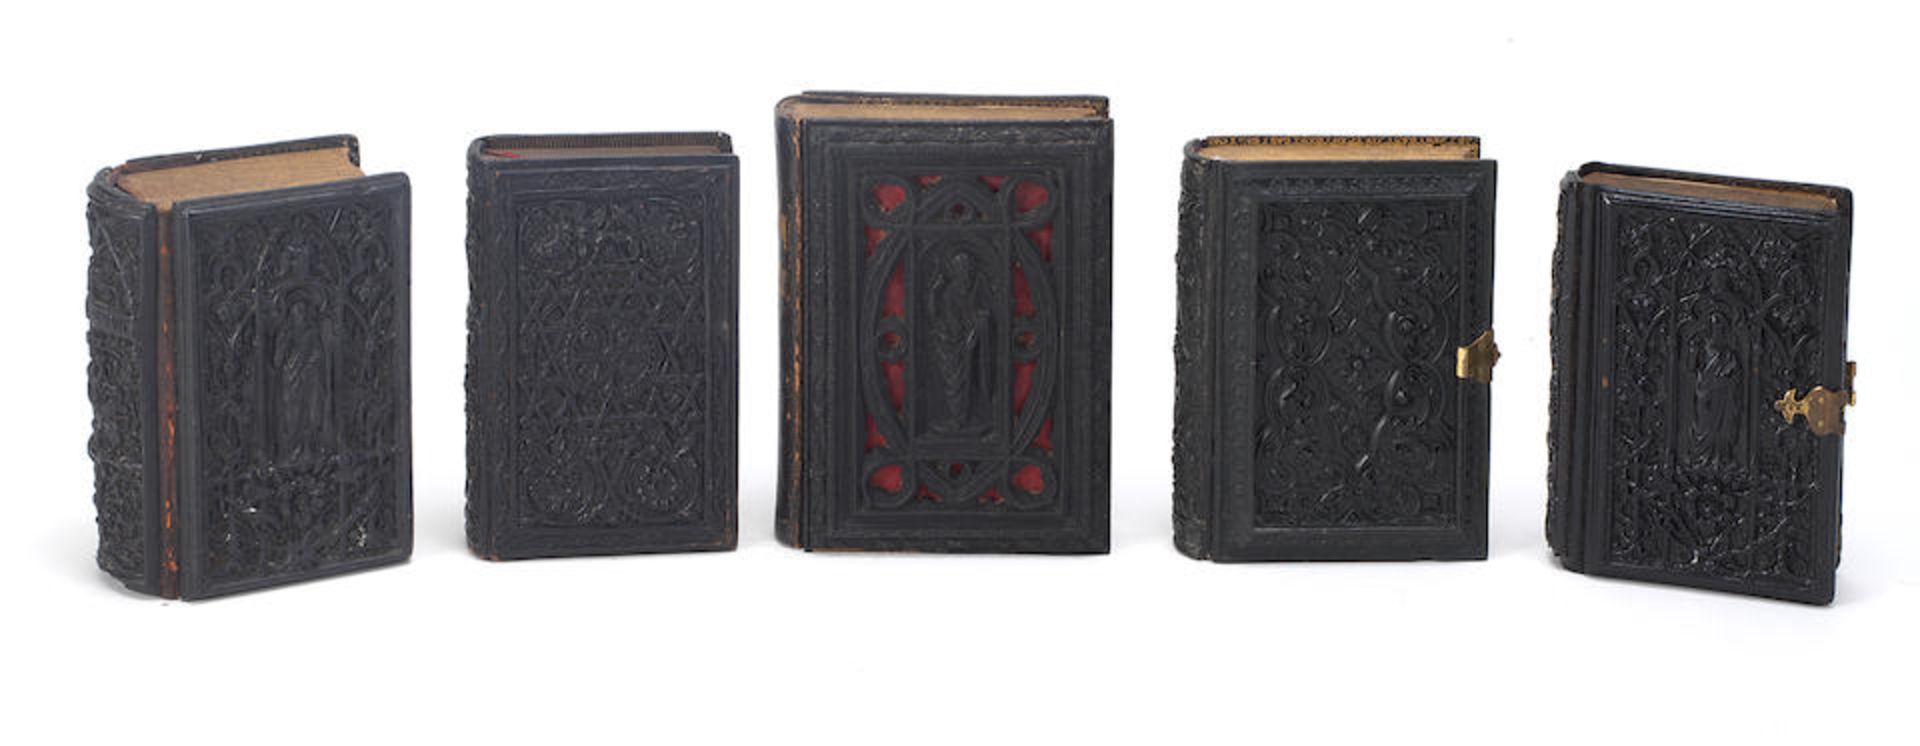 BIBLES - PAPIER-MÂCHÉ The Holy Bible, Containing the Old and New Testaments, George E....